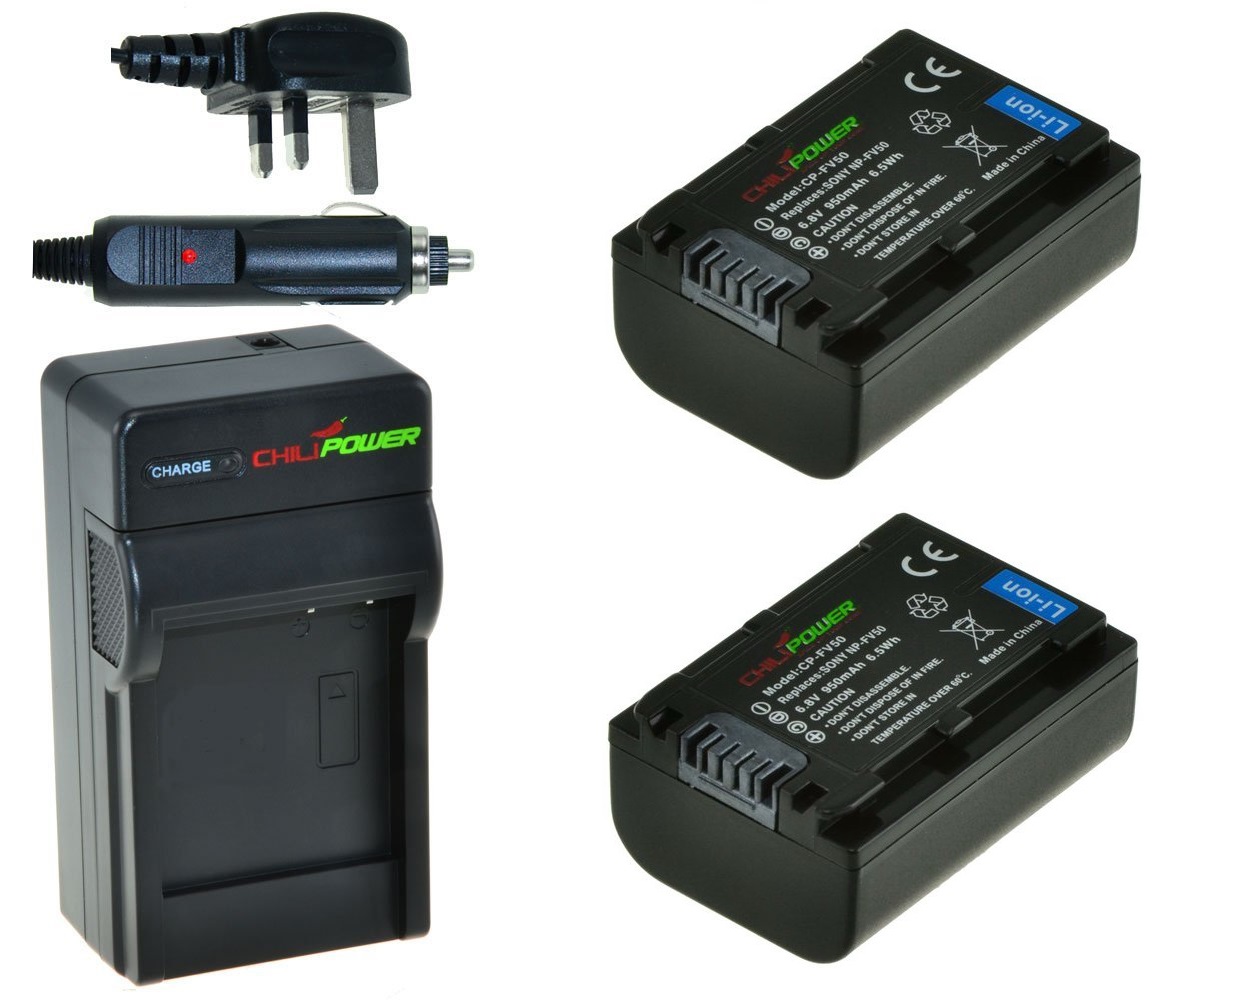 Voordracht Hol boiler 2 x NP-FV50 accu's voor Sony - Charger Kit + car-charger - UK version |  Saake-shop.nl